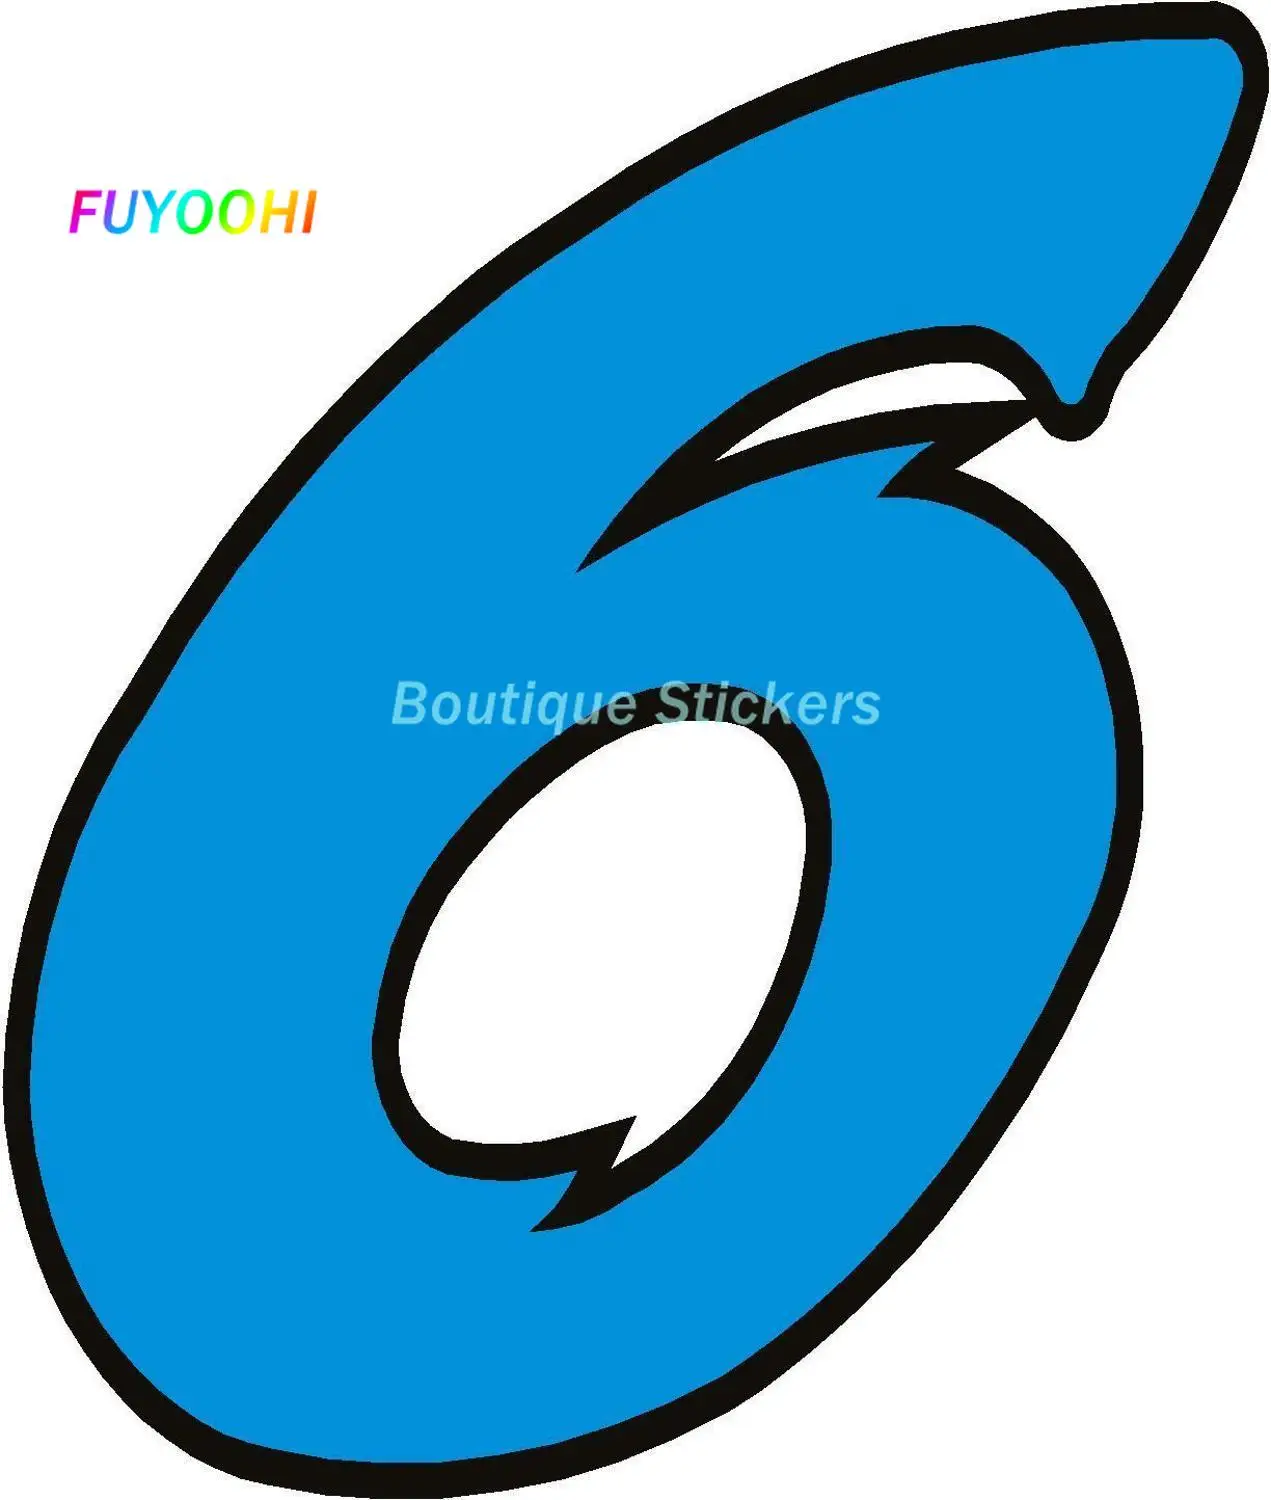 

FUYOOHI Exterior/Protection Fashion Stickers Dark Blue Race Numbers with Black Border Vinyl Decal Graphic Number Car Sticker